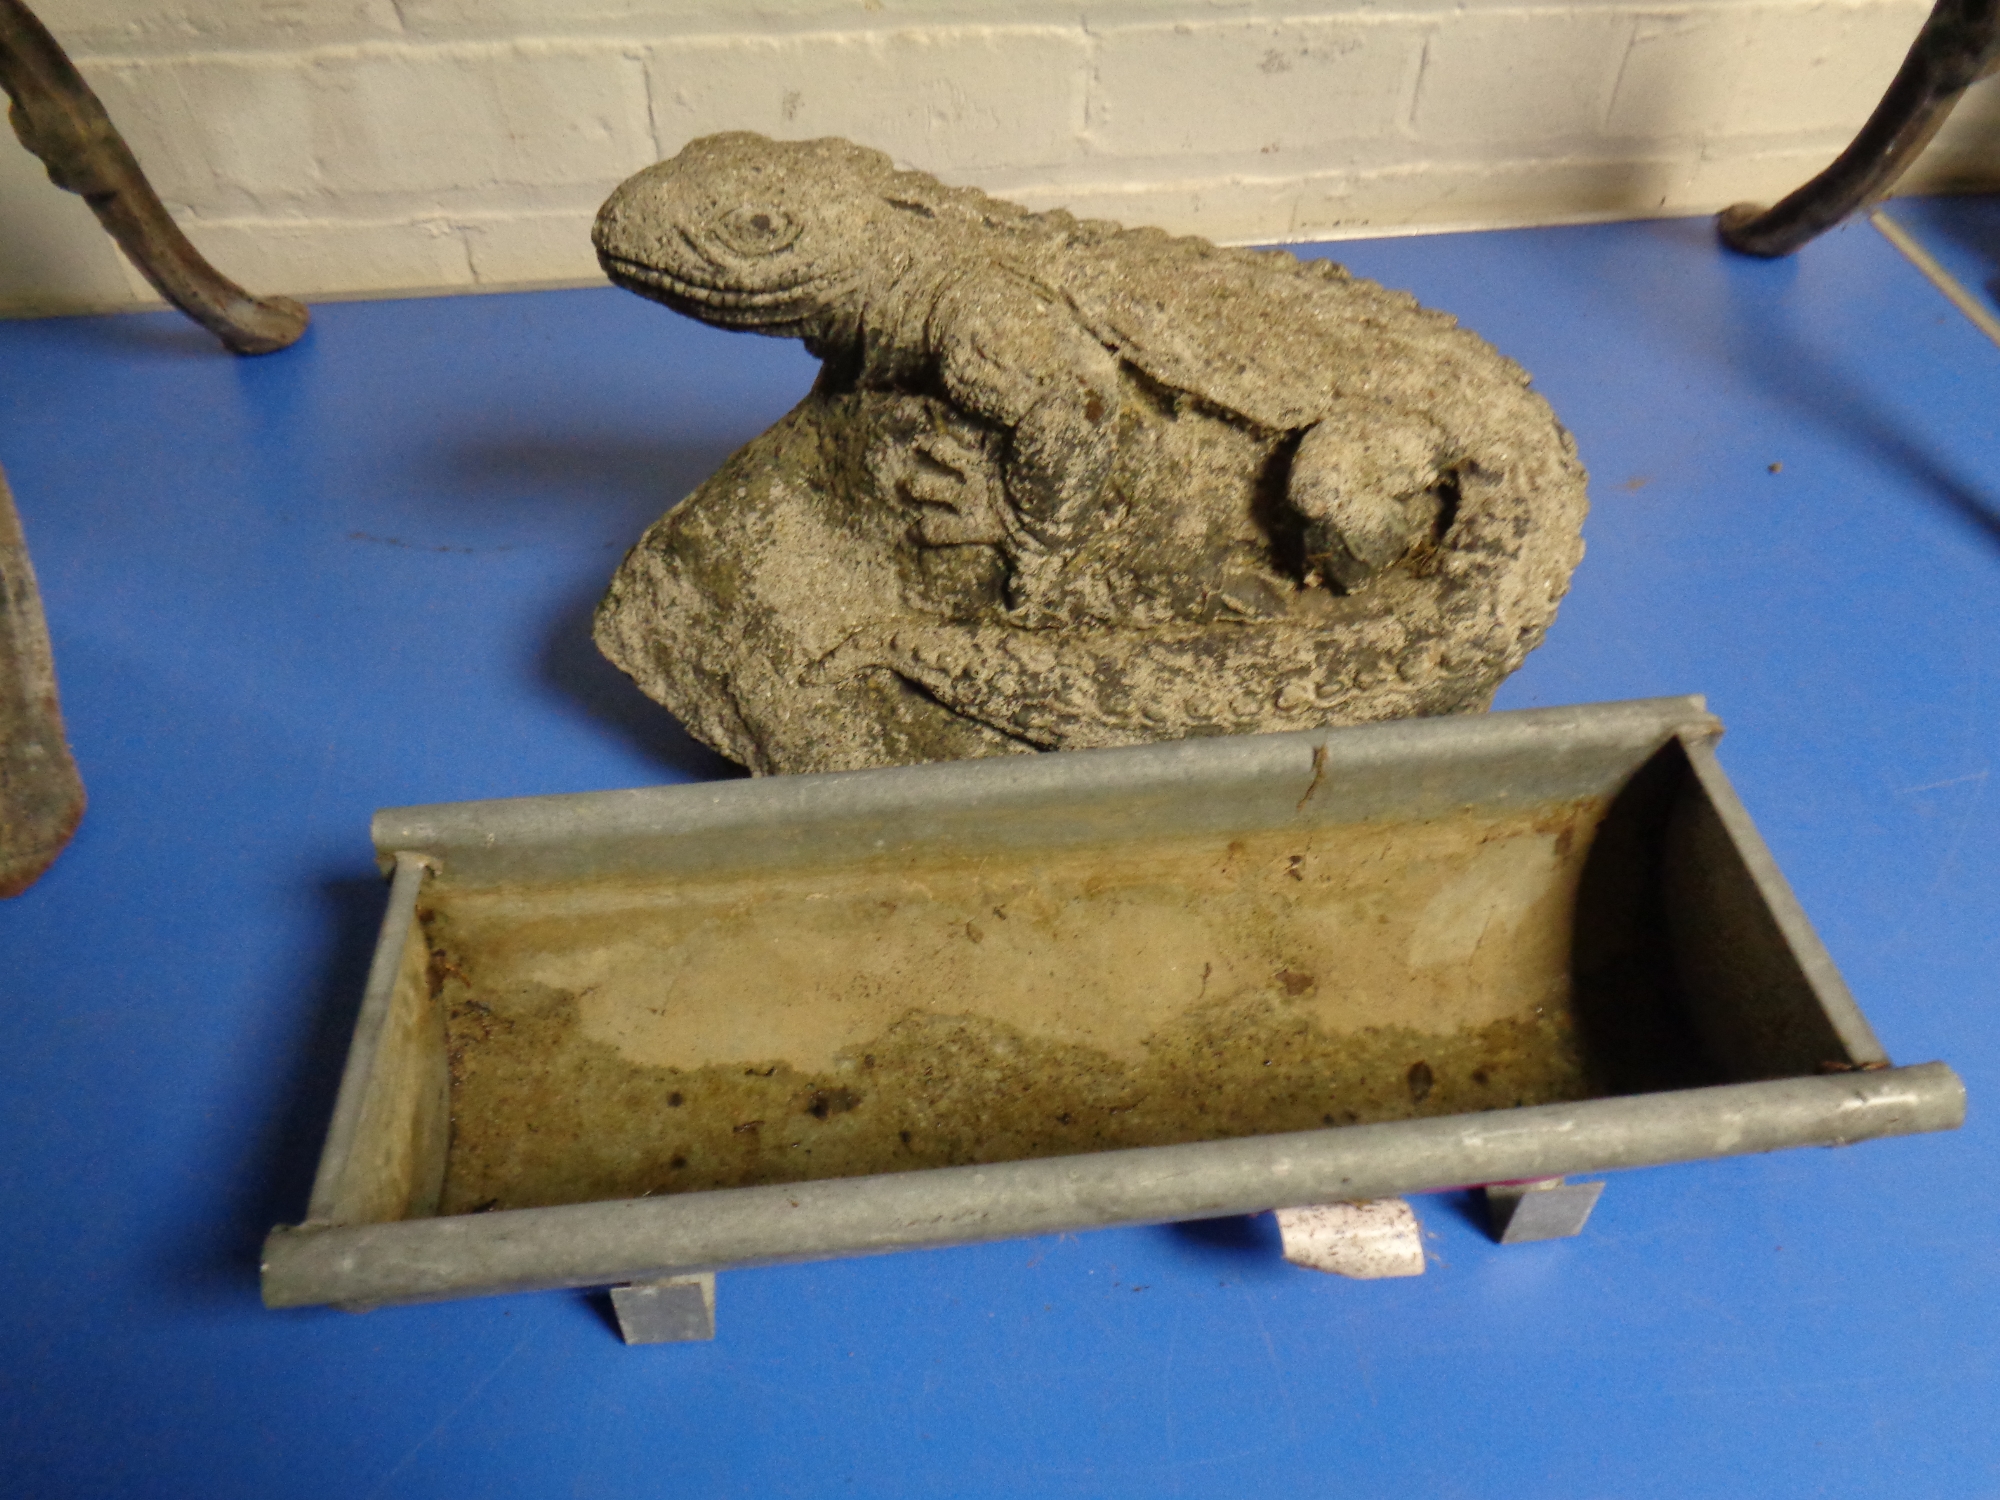 A concrete ornament - lizard on rock together with a small galvanized trough